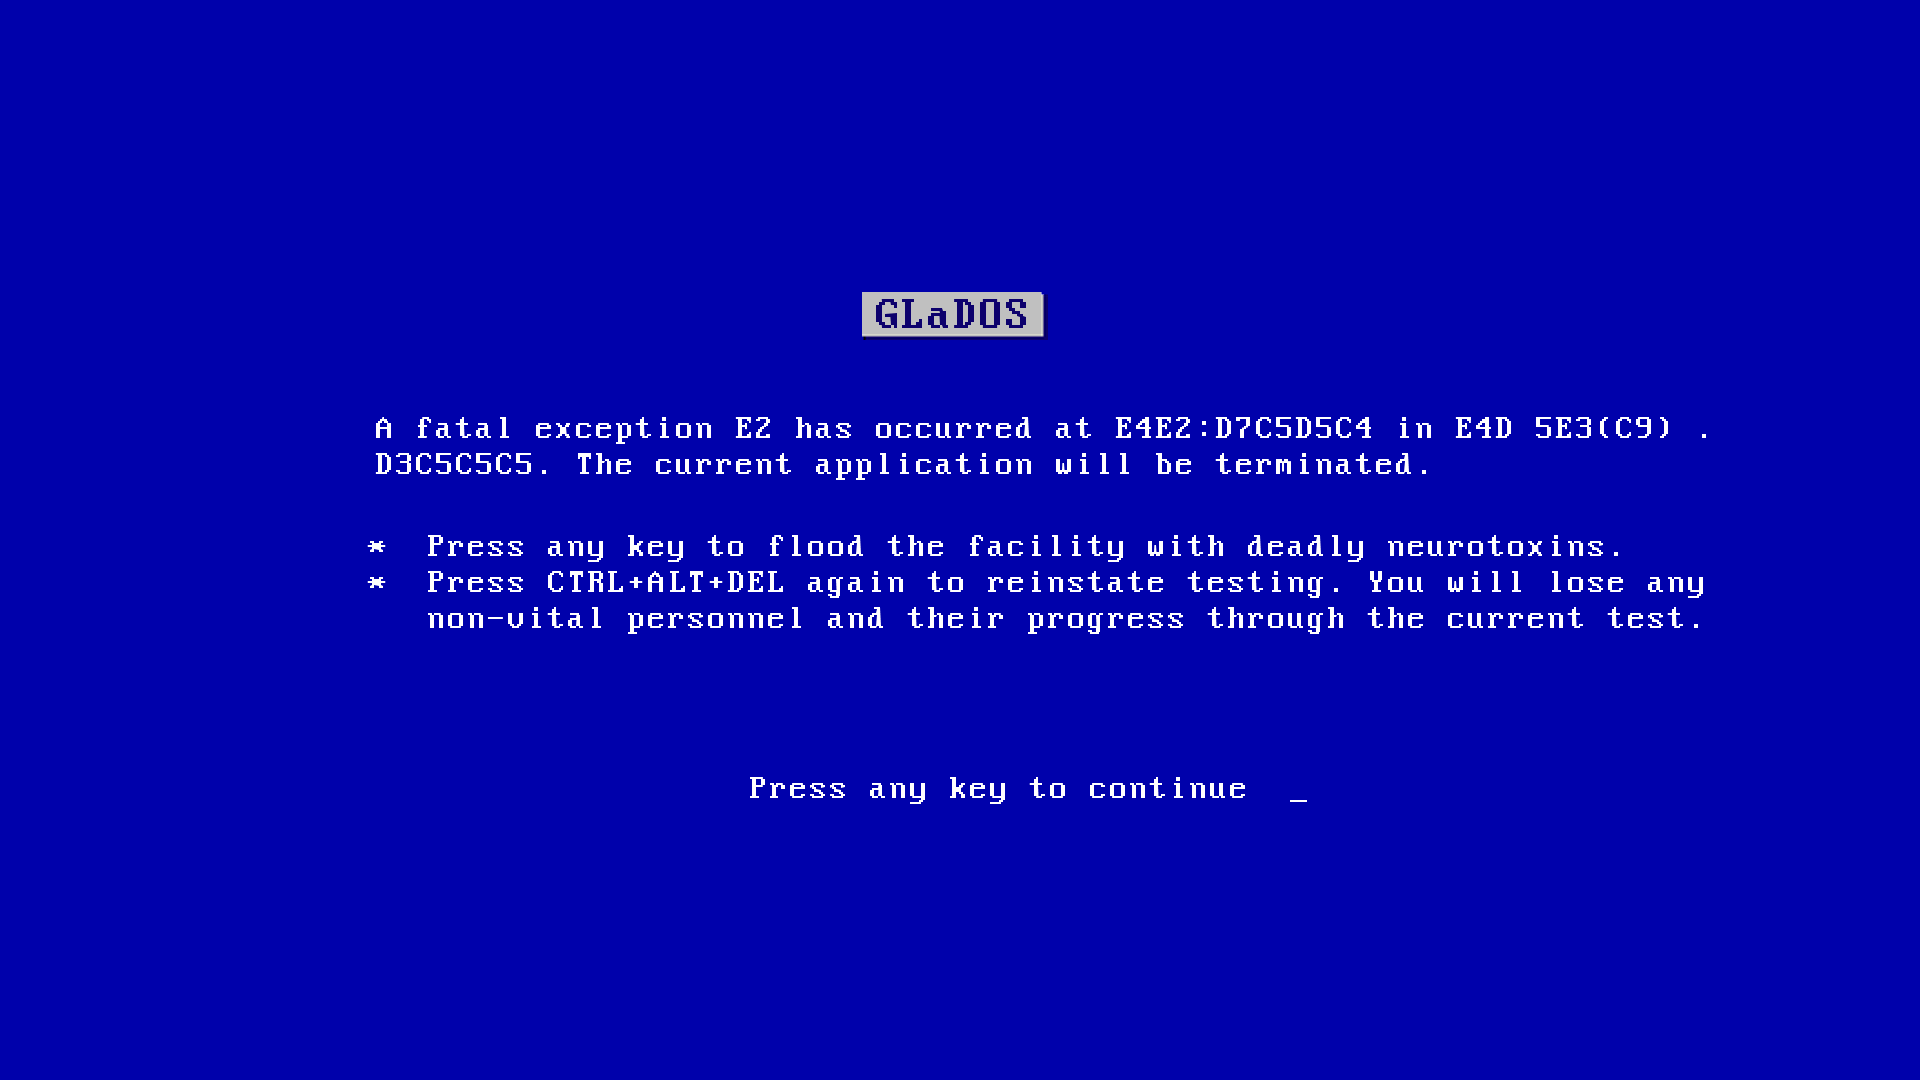 Blue Screen Of Death Windows 7 Wallpapers